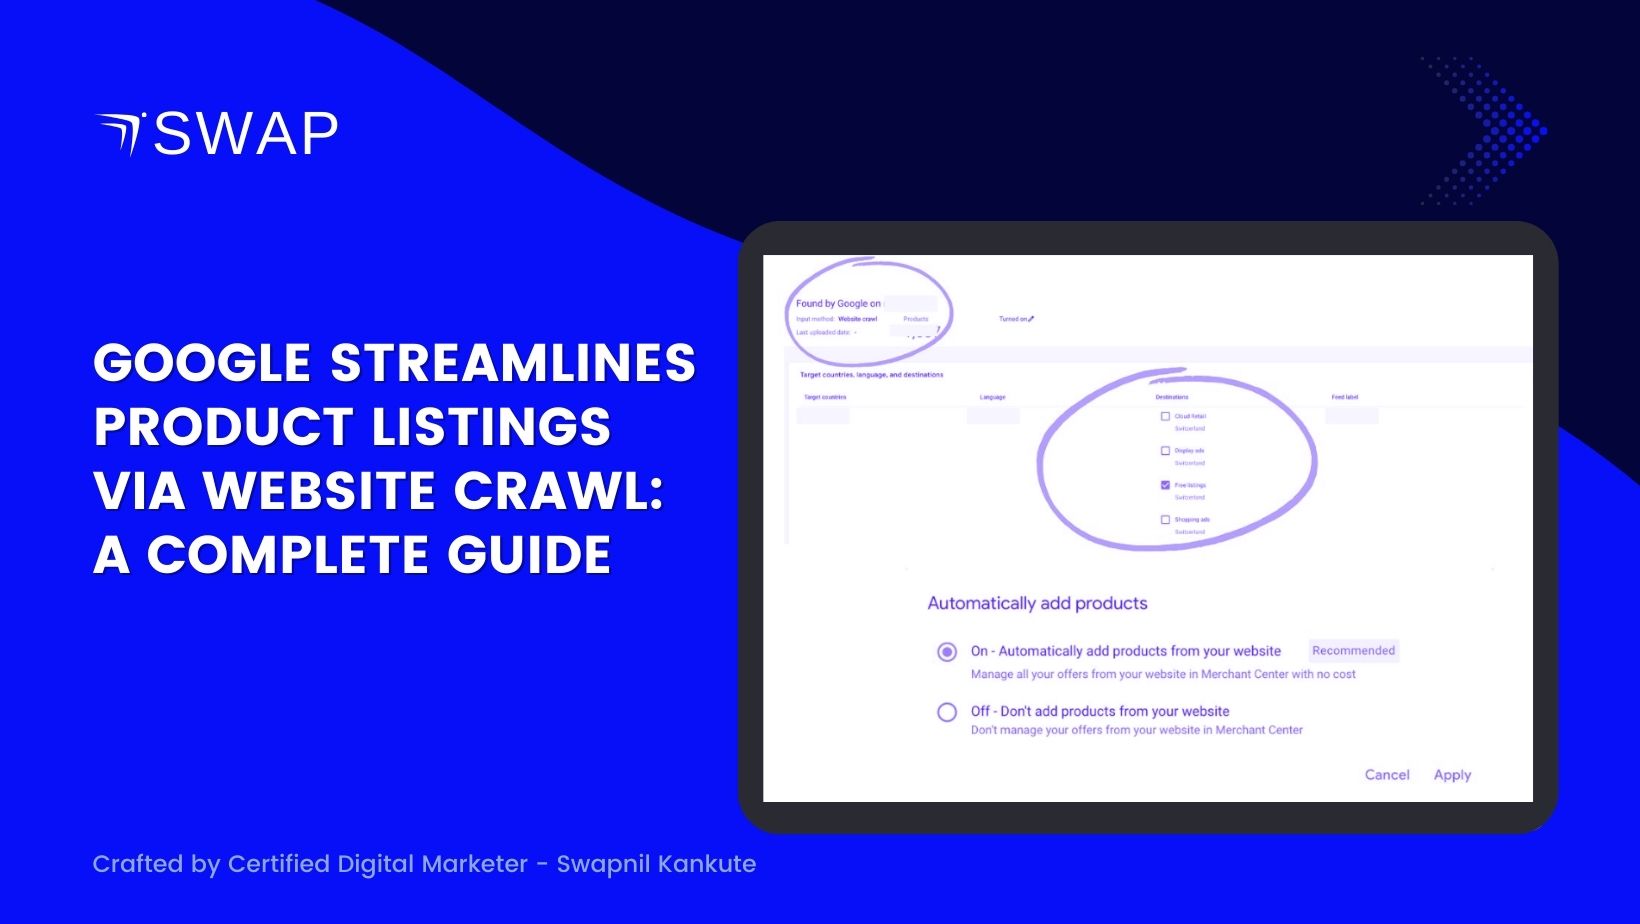 Google Streamlines Product Listings via Website Crawl: A Complete Guide